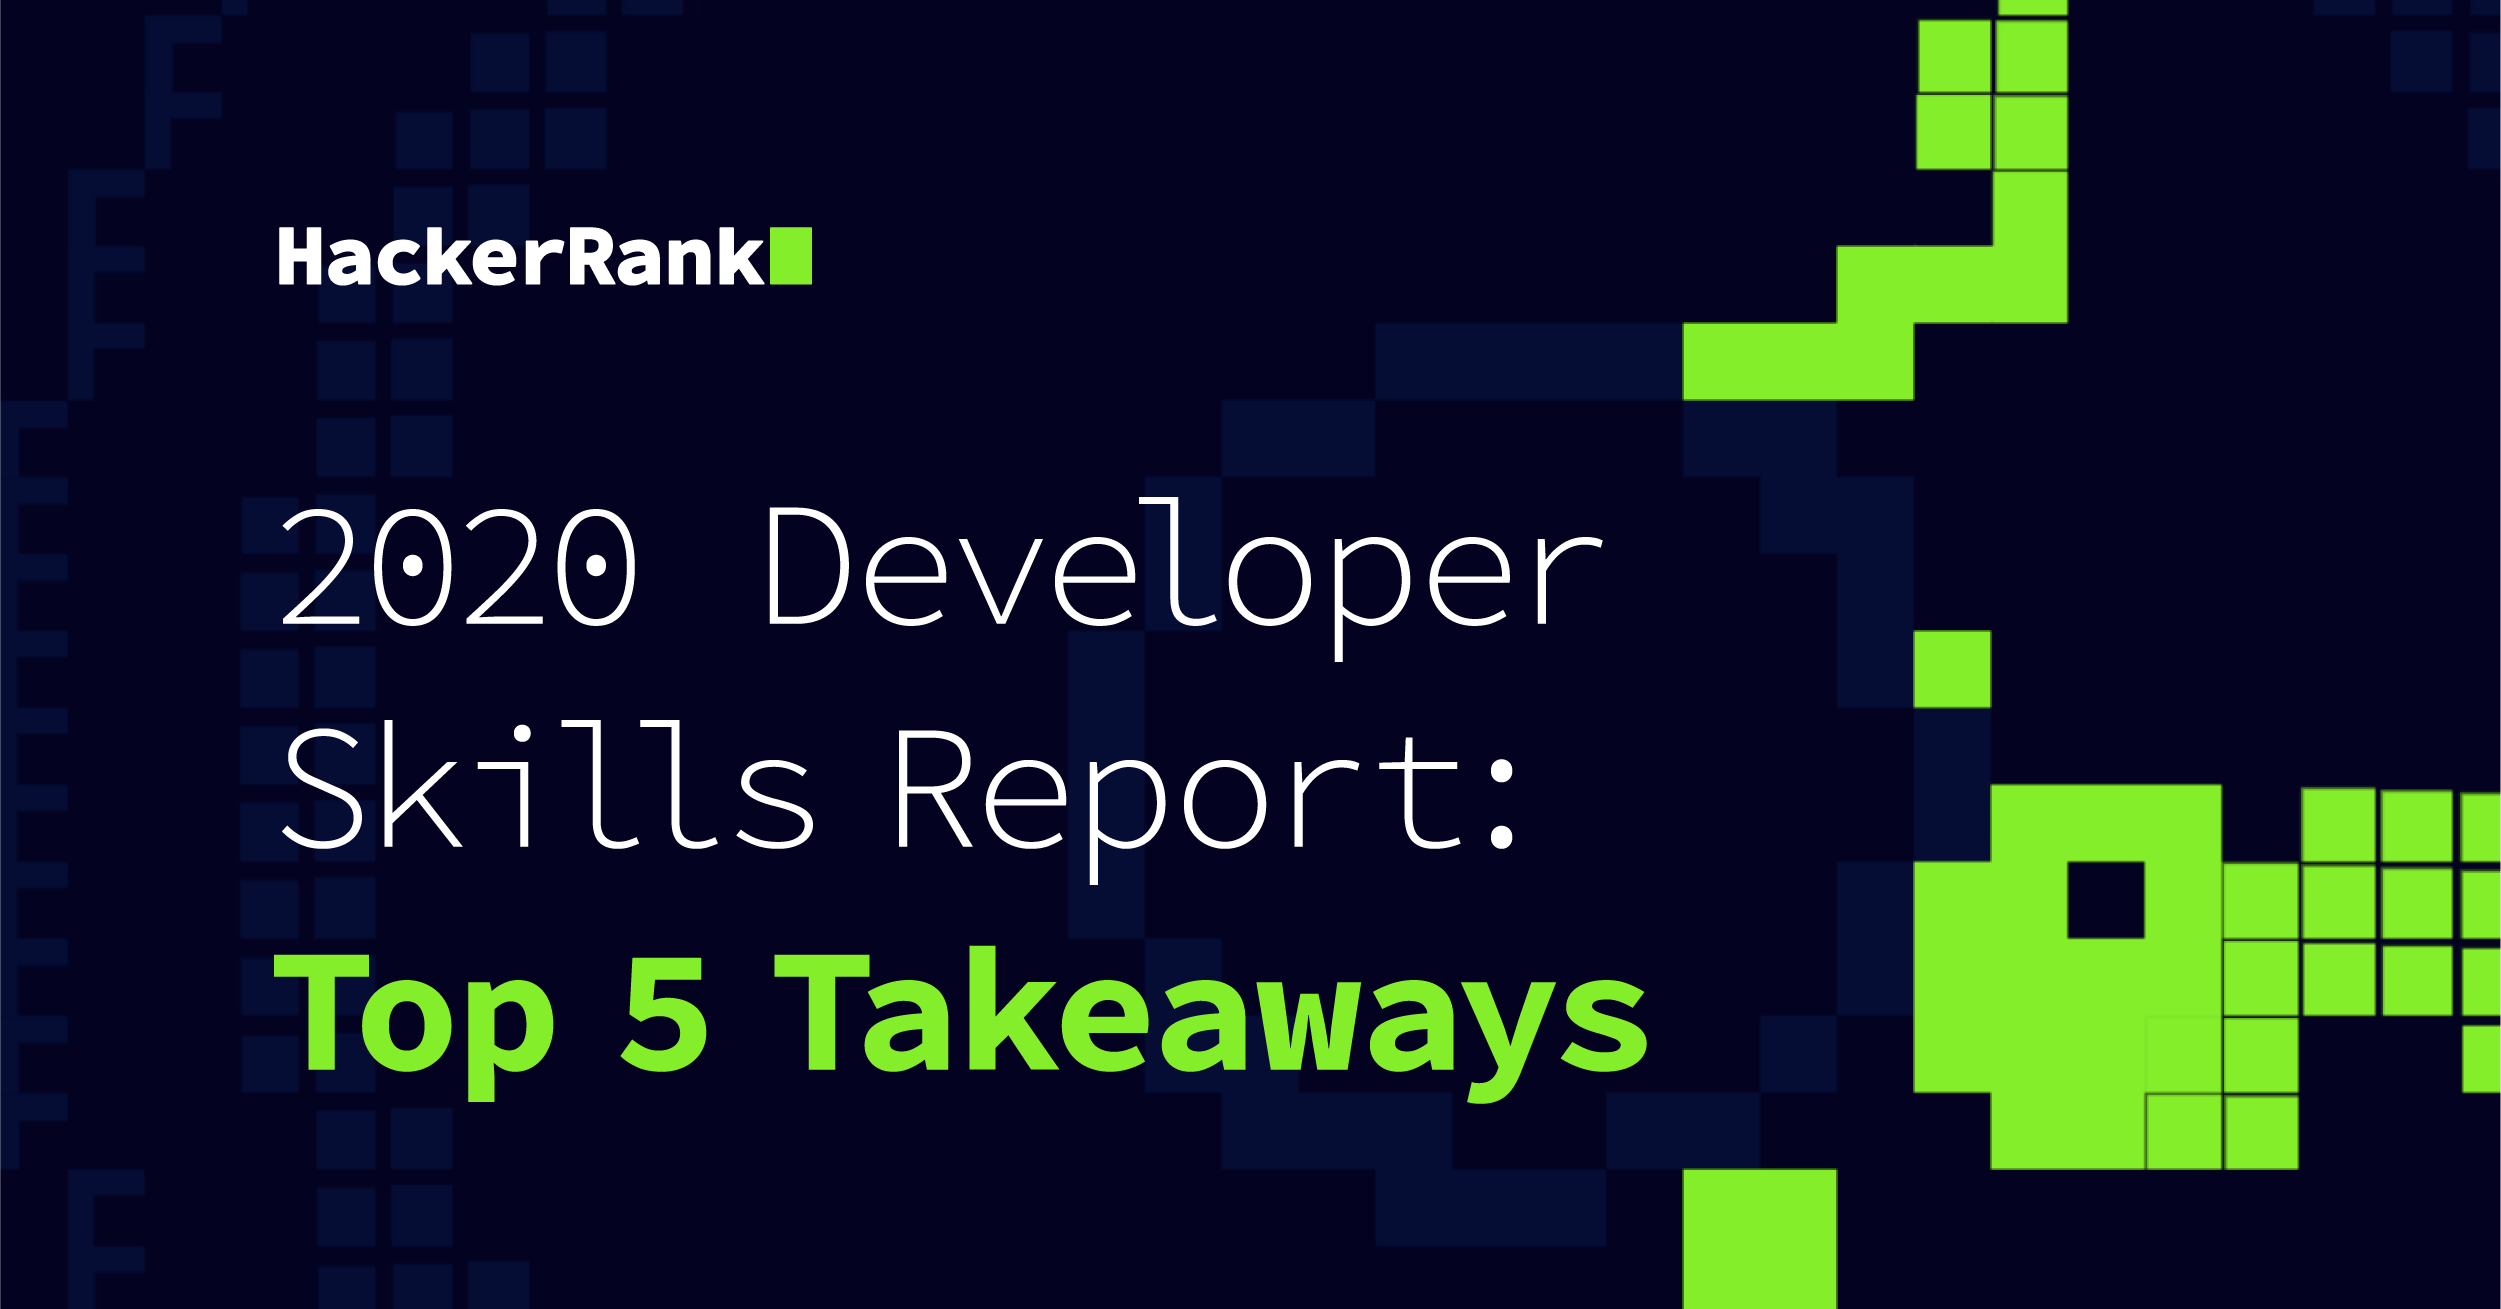 Image with code art in background that reads: "2020 Developer Skills Report - Top 5 Takeaways"